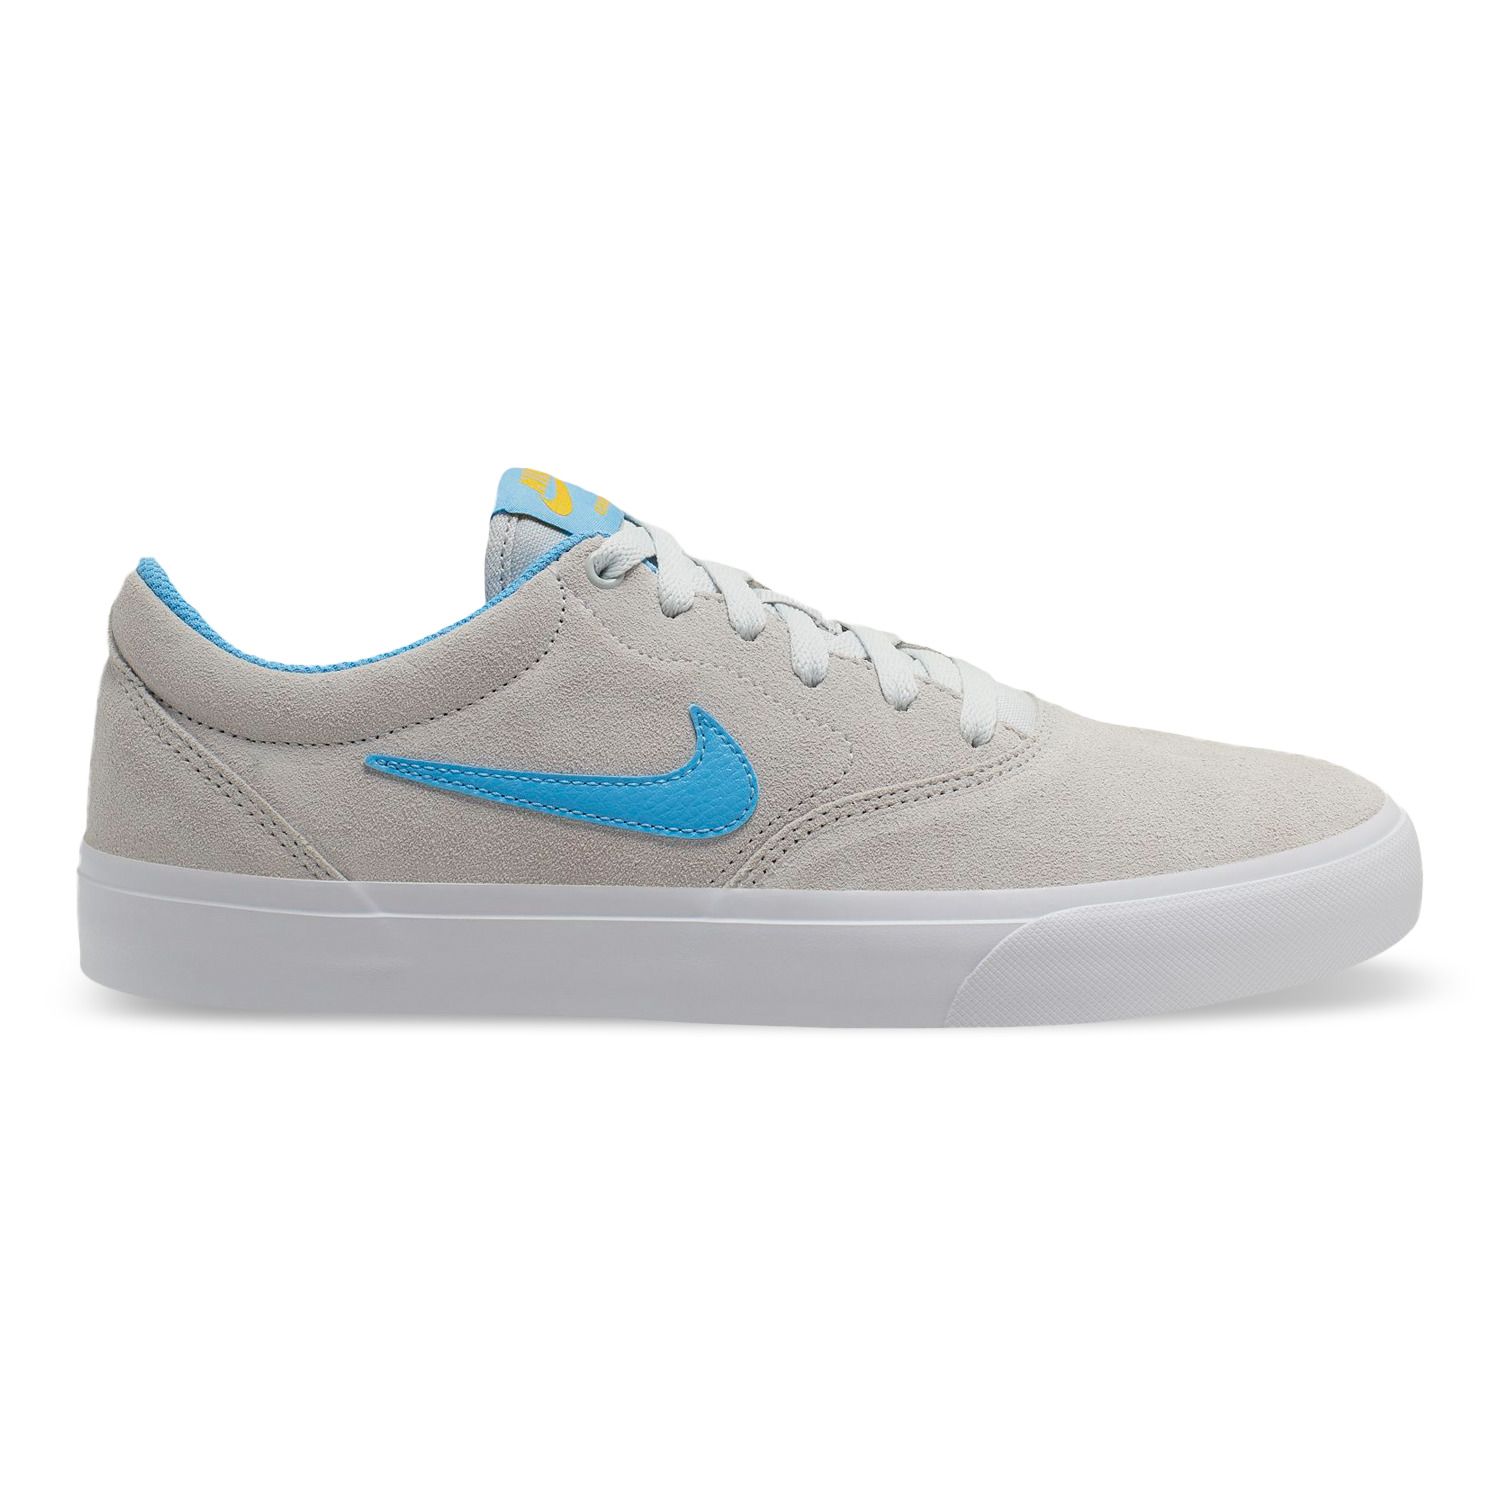 Nike SB Charge Suede Men's Skate Shoes